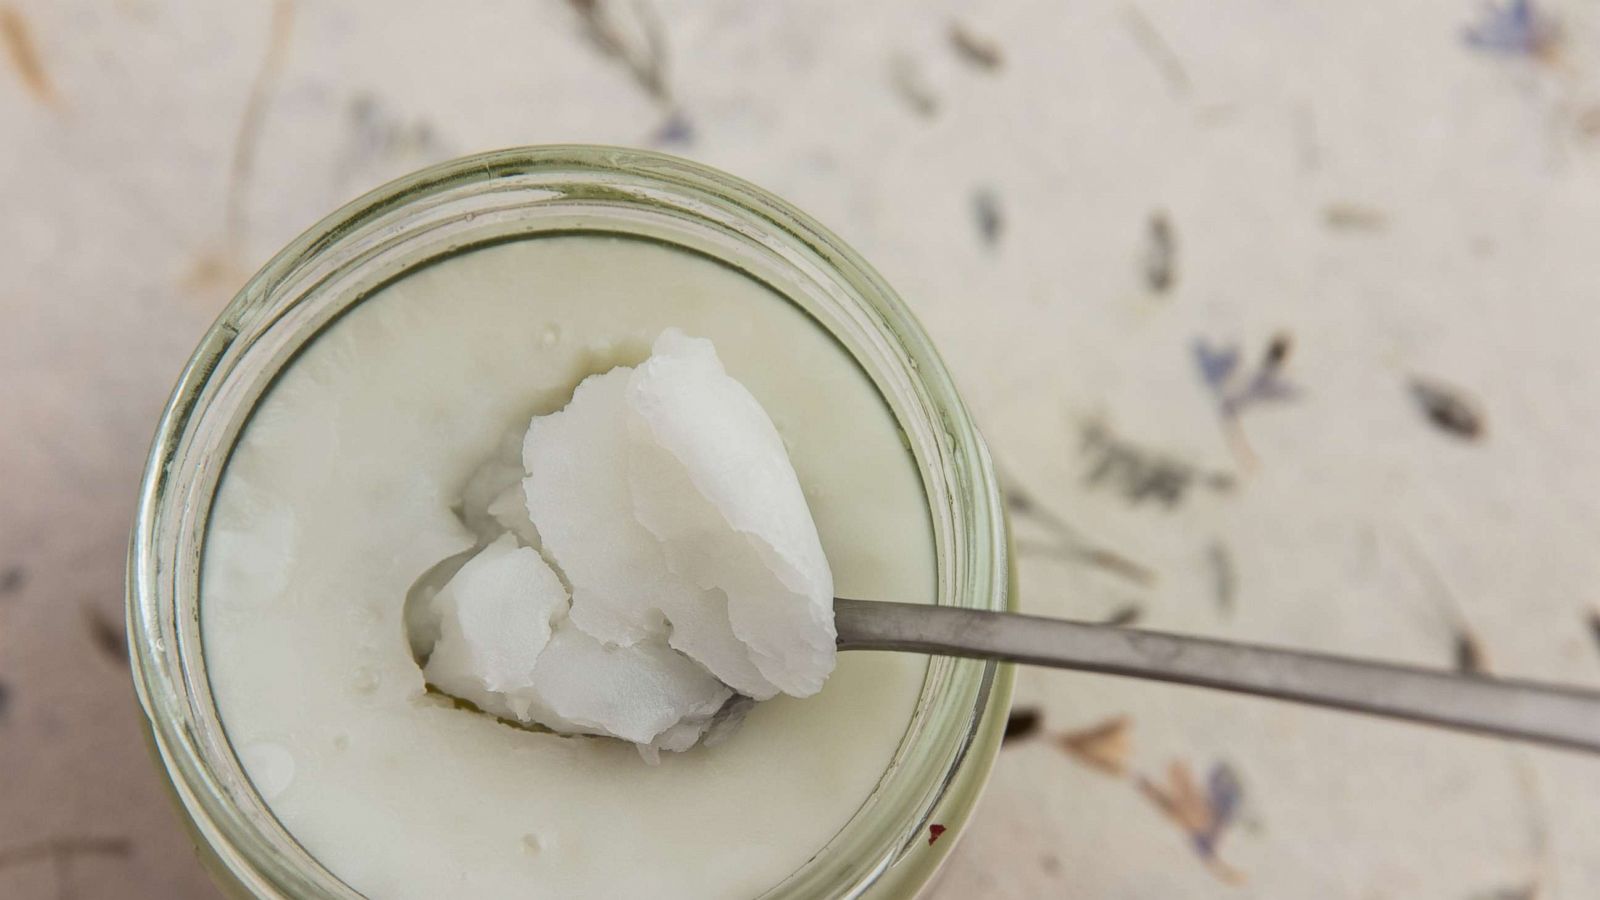 What to know about coconut oil after a Harvard professor called it 'pure  poison' - ABC News